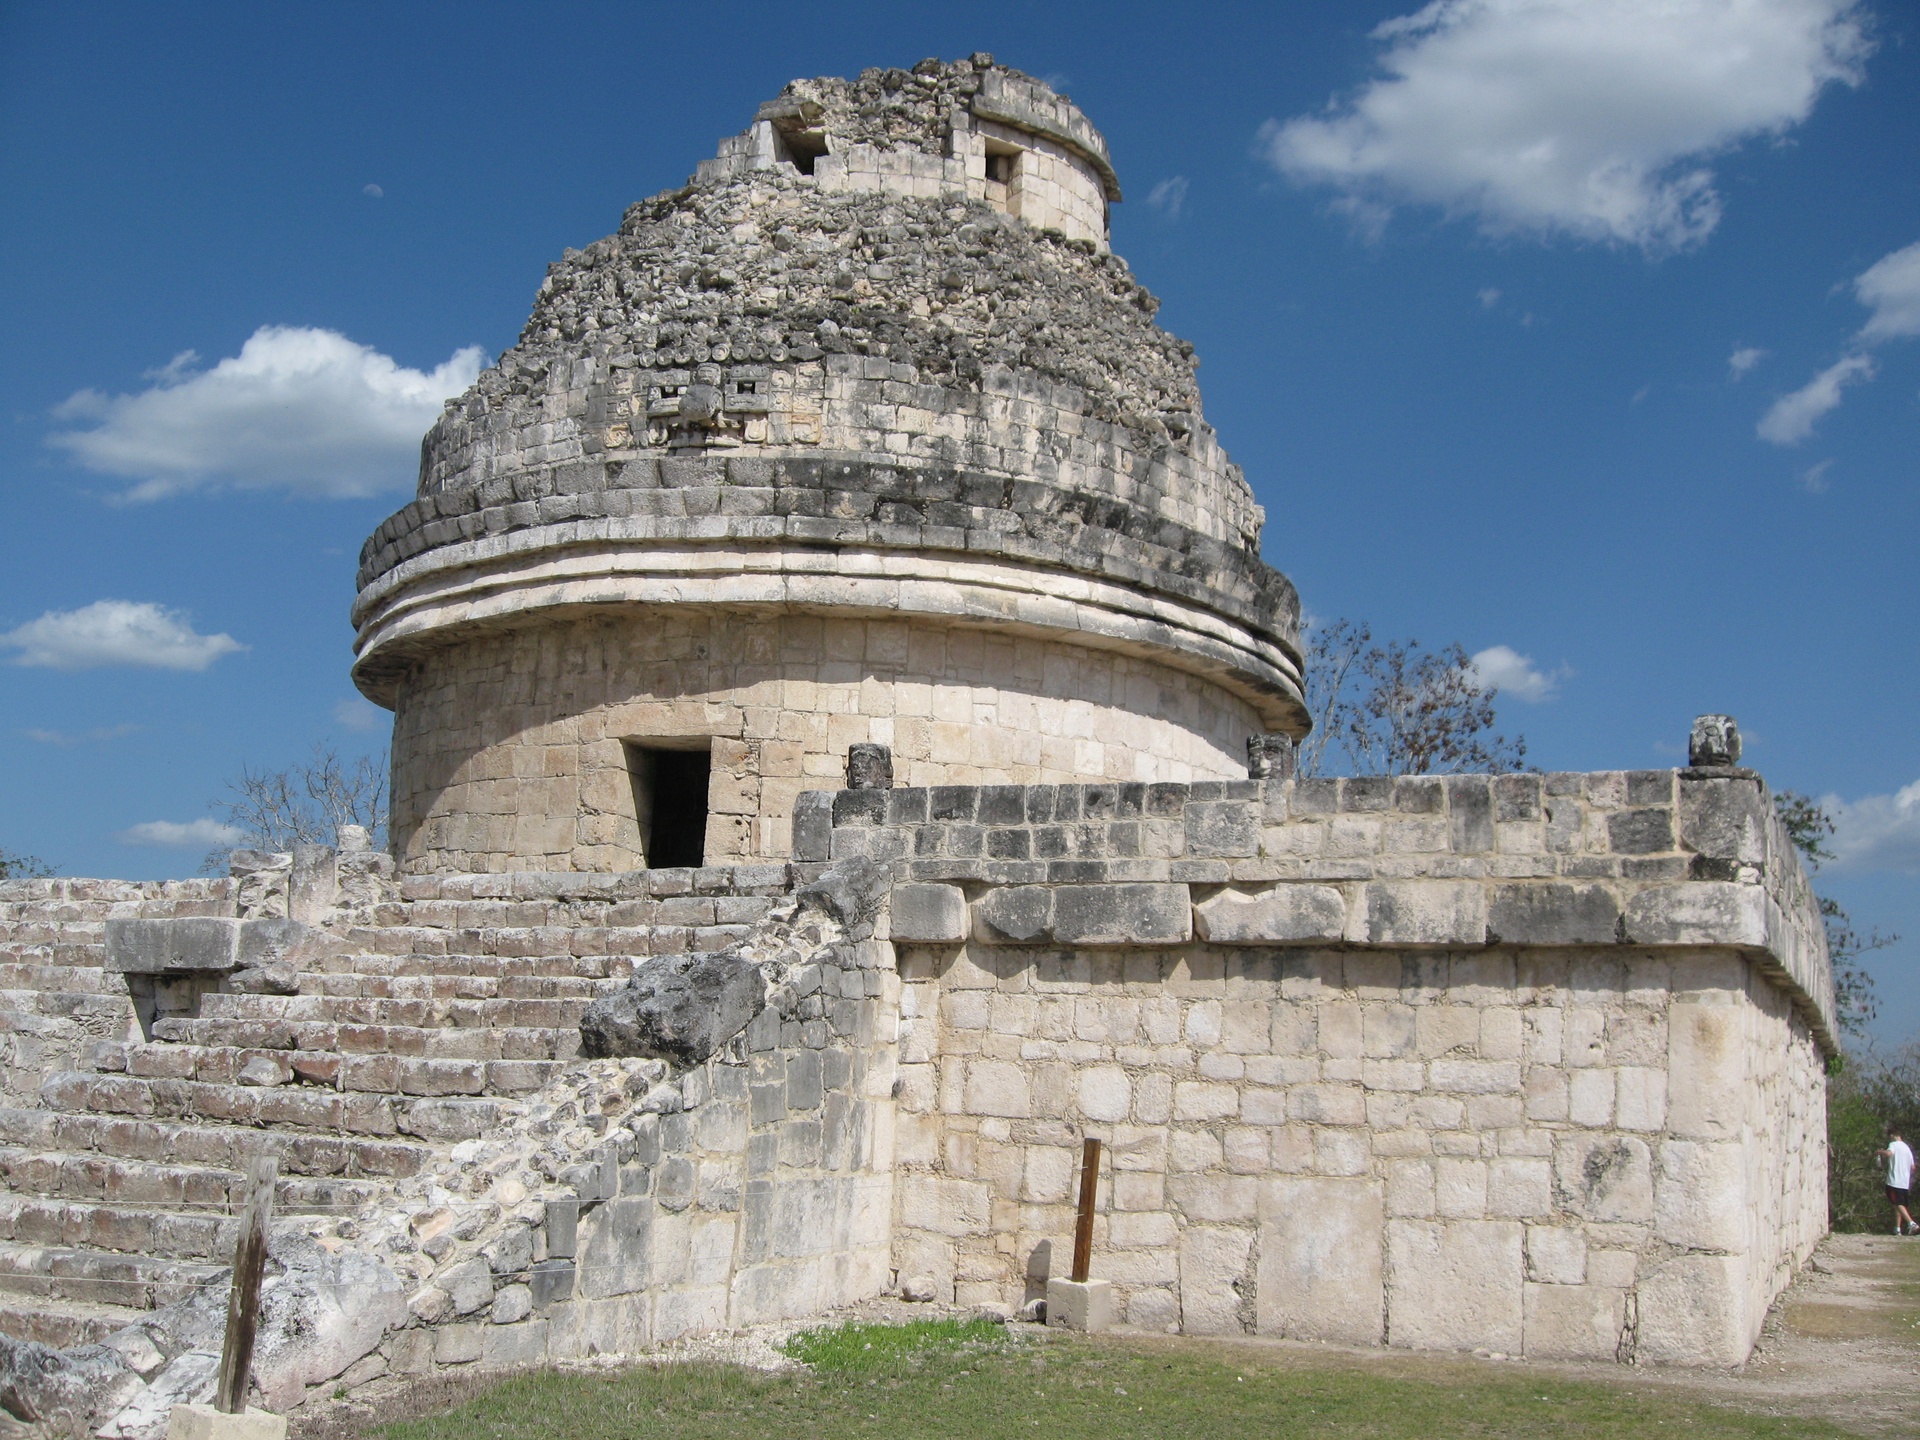 Images of Maya Astronomy Observatories - #SpaceHero